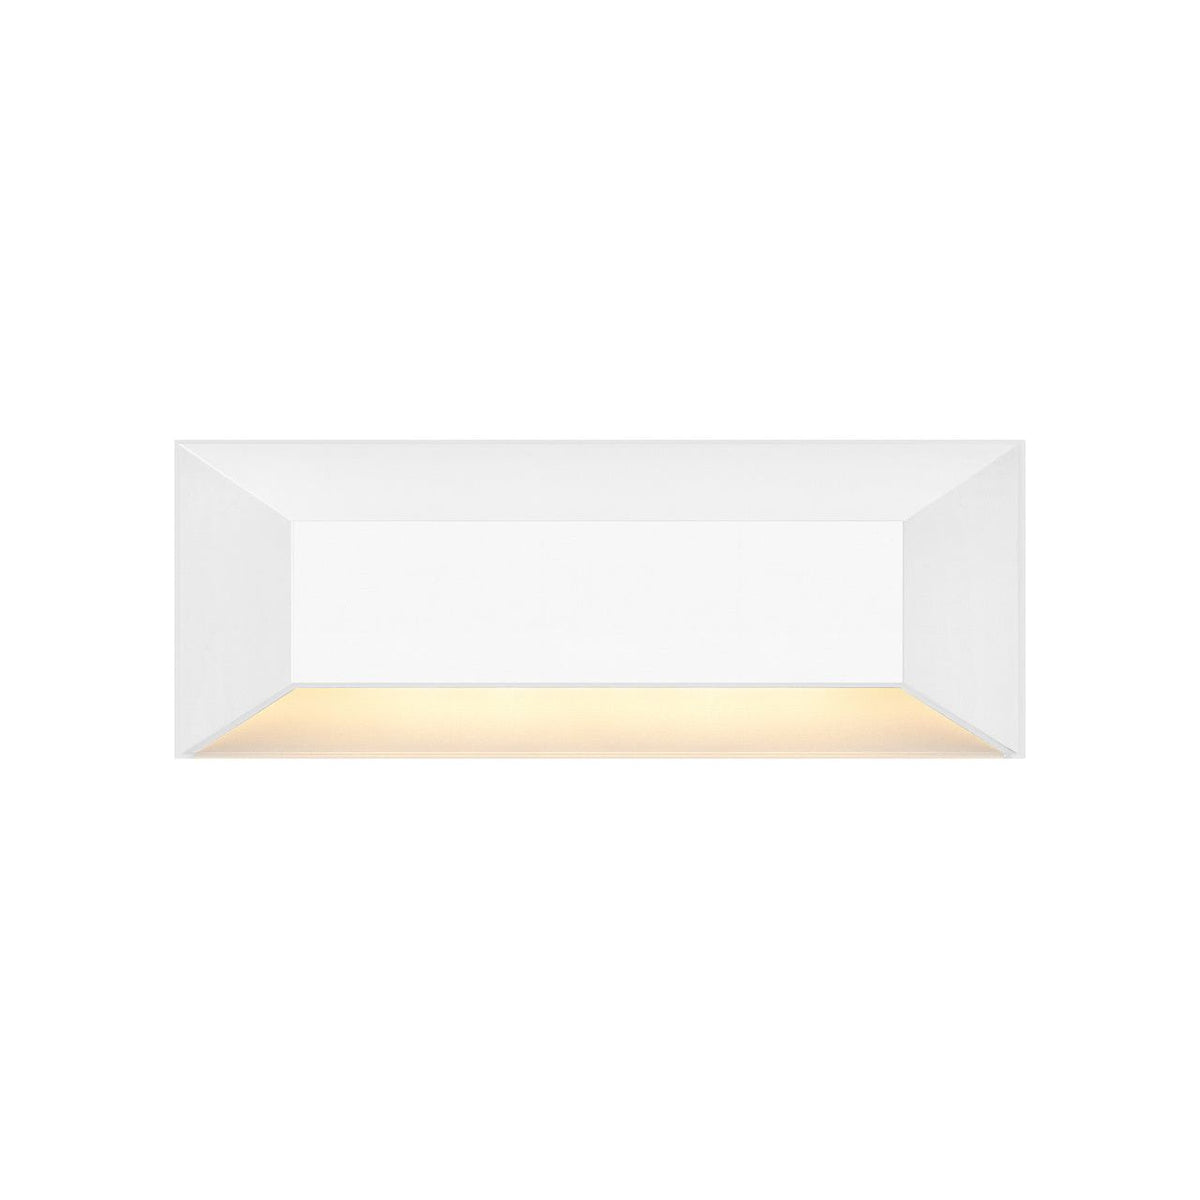 Hinkley Canada - 15228MW - LED Wall Sconce - Nuvi Deck Sconce - Matte White